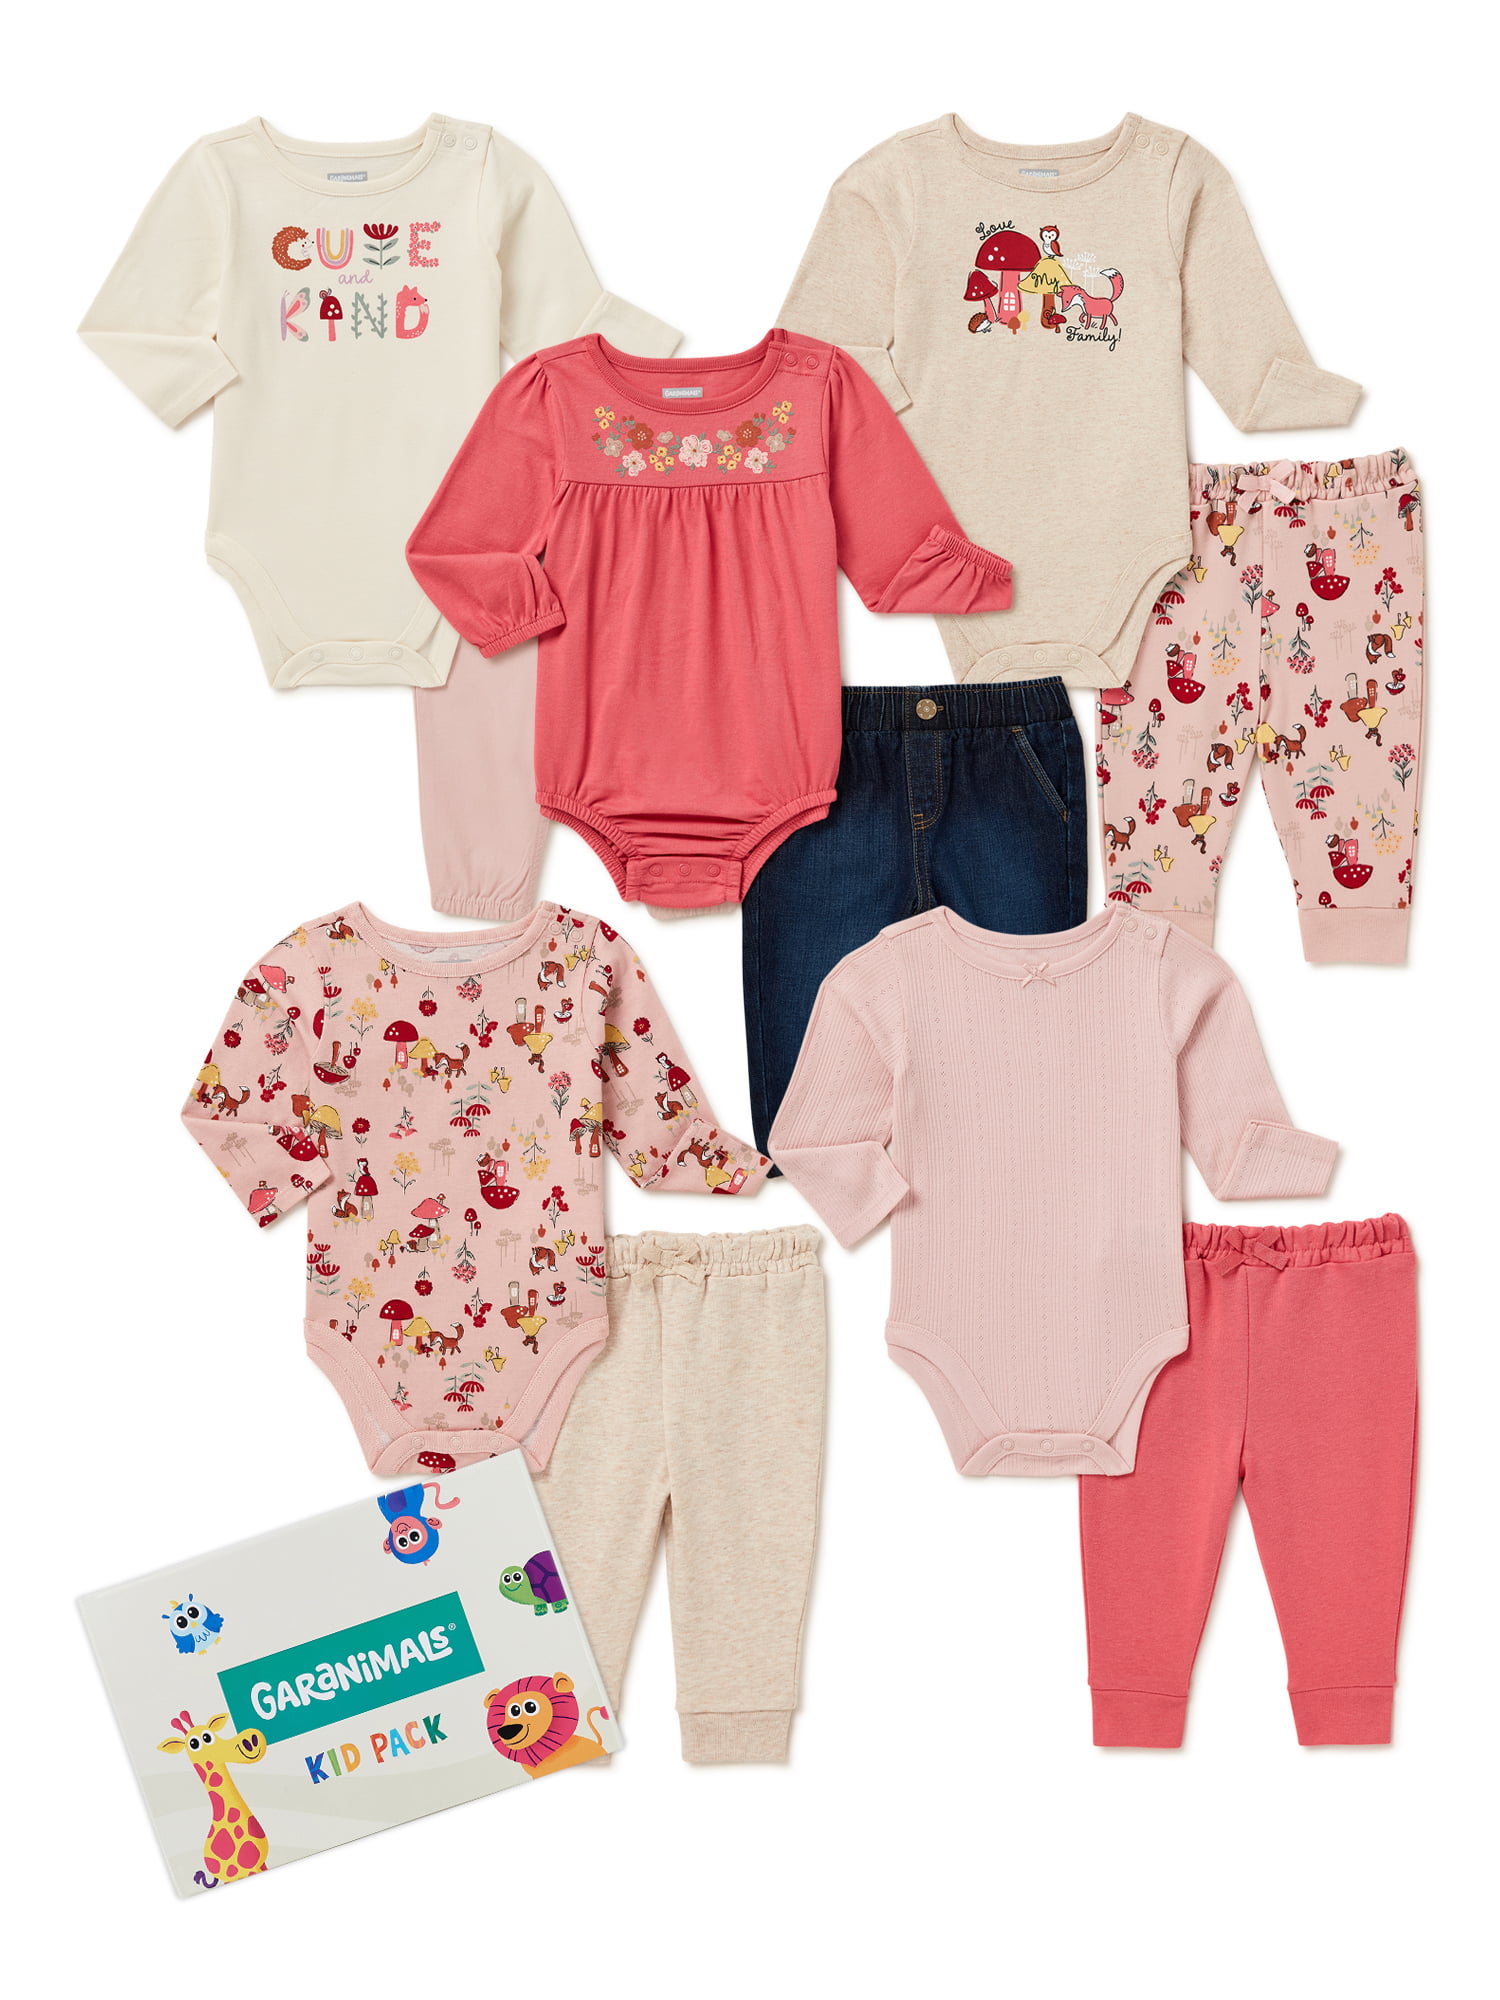 Random Bundle of Girls 2-3 Years Clothes 15 Items 